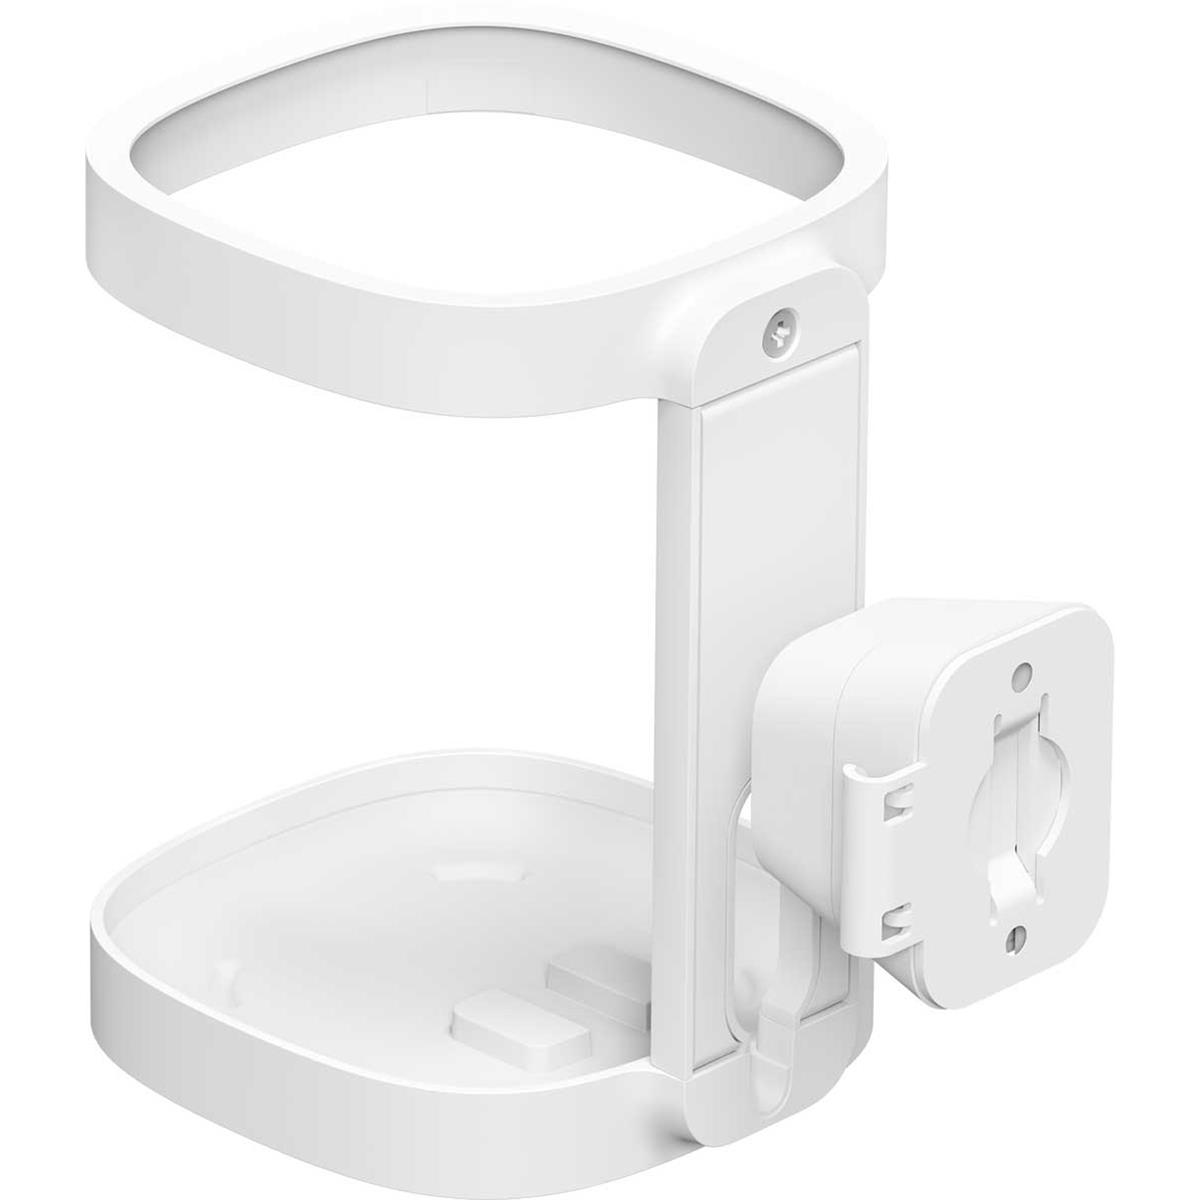 

Sonos Wall Mount for Sonos One, One SL, Play:1, White